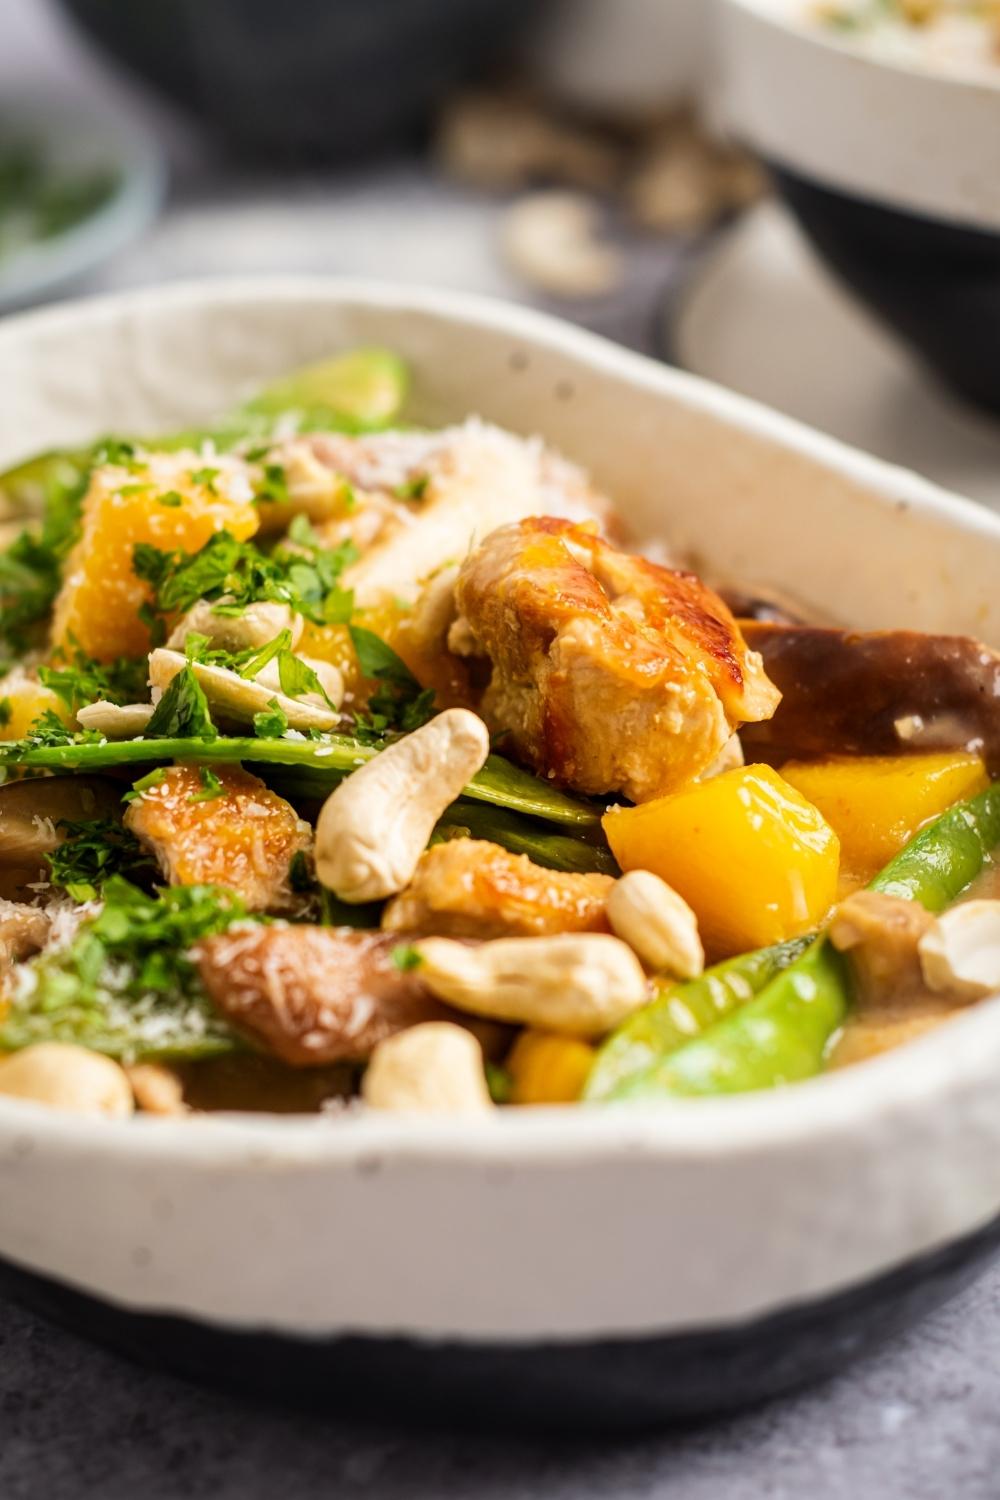 Ceramic bowl with golden browned chicken, cashews, snap peas, and mango mixed together